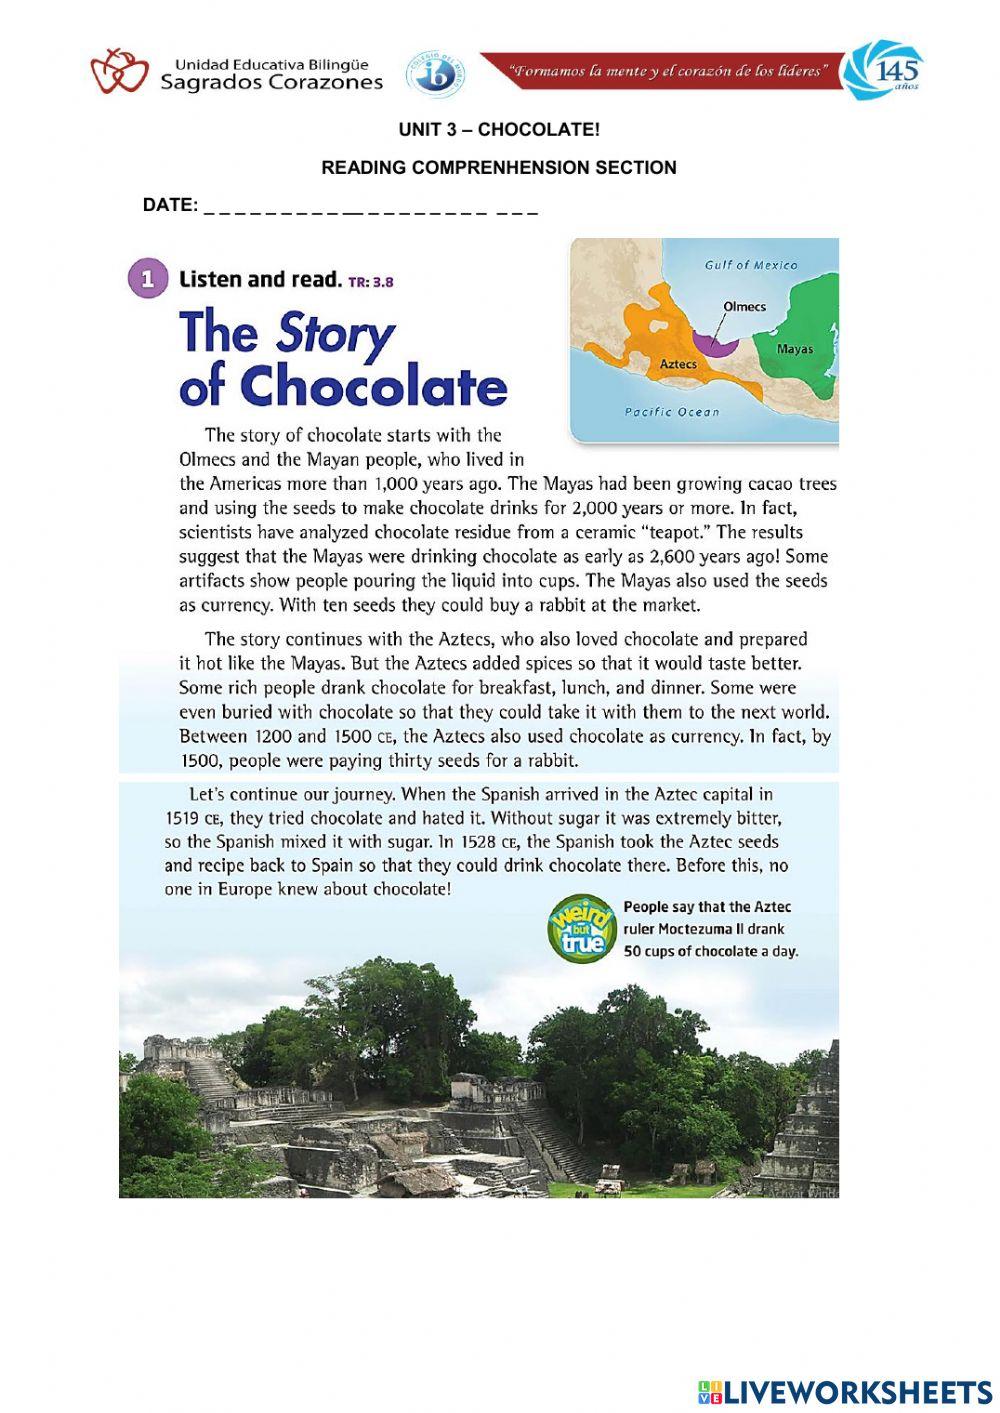 The Story of Chocolate Reading Comprehension